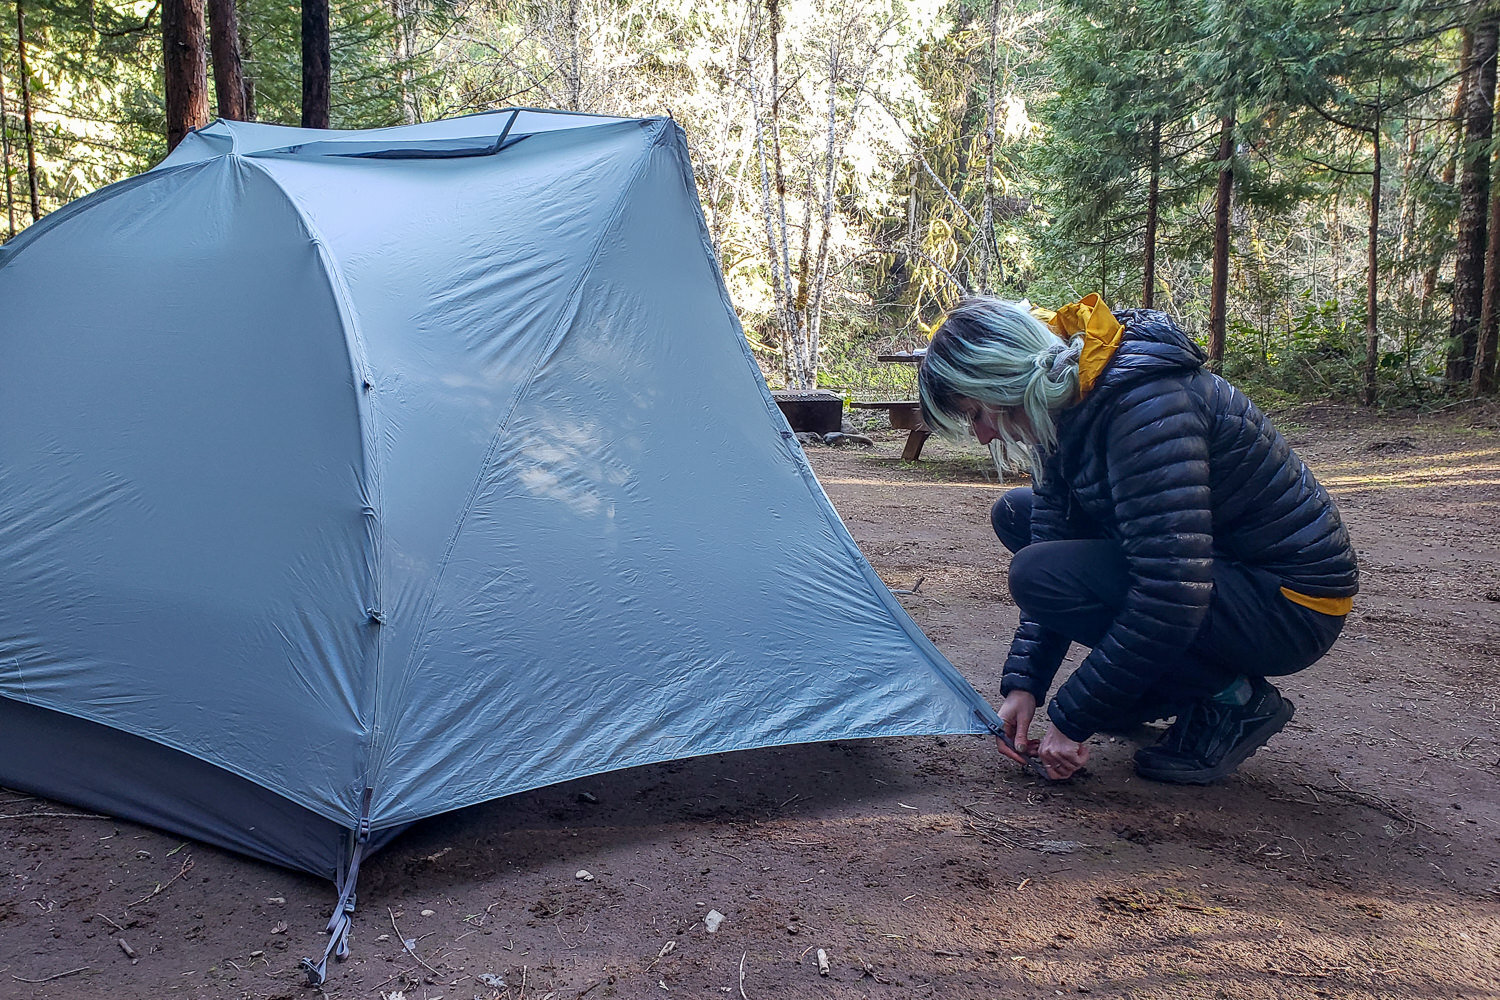 The Telos is easy for a single hiker to set up by themselves.